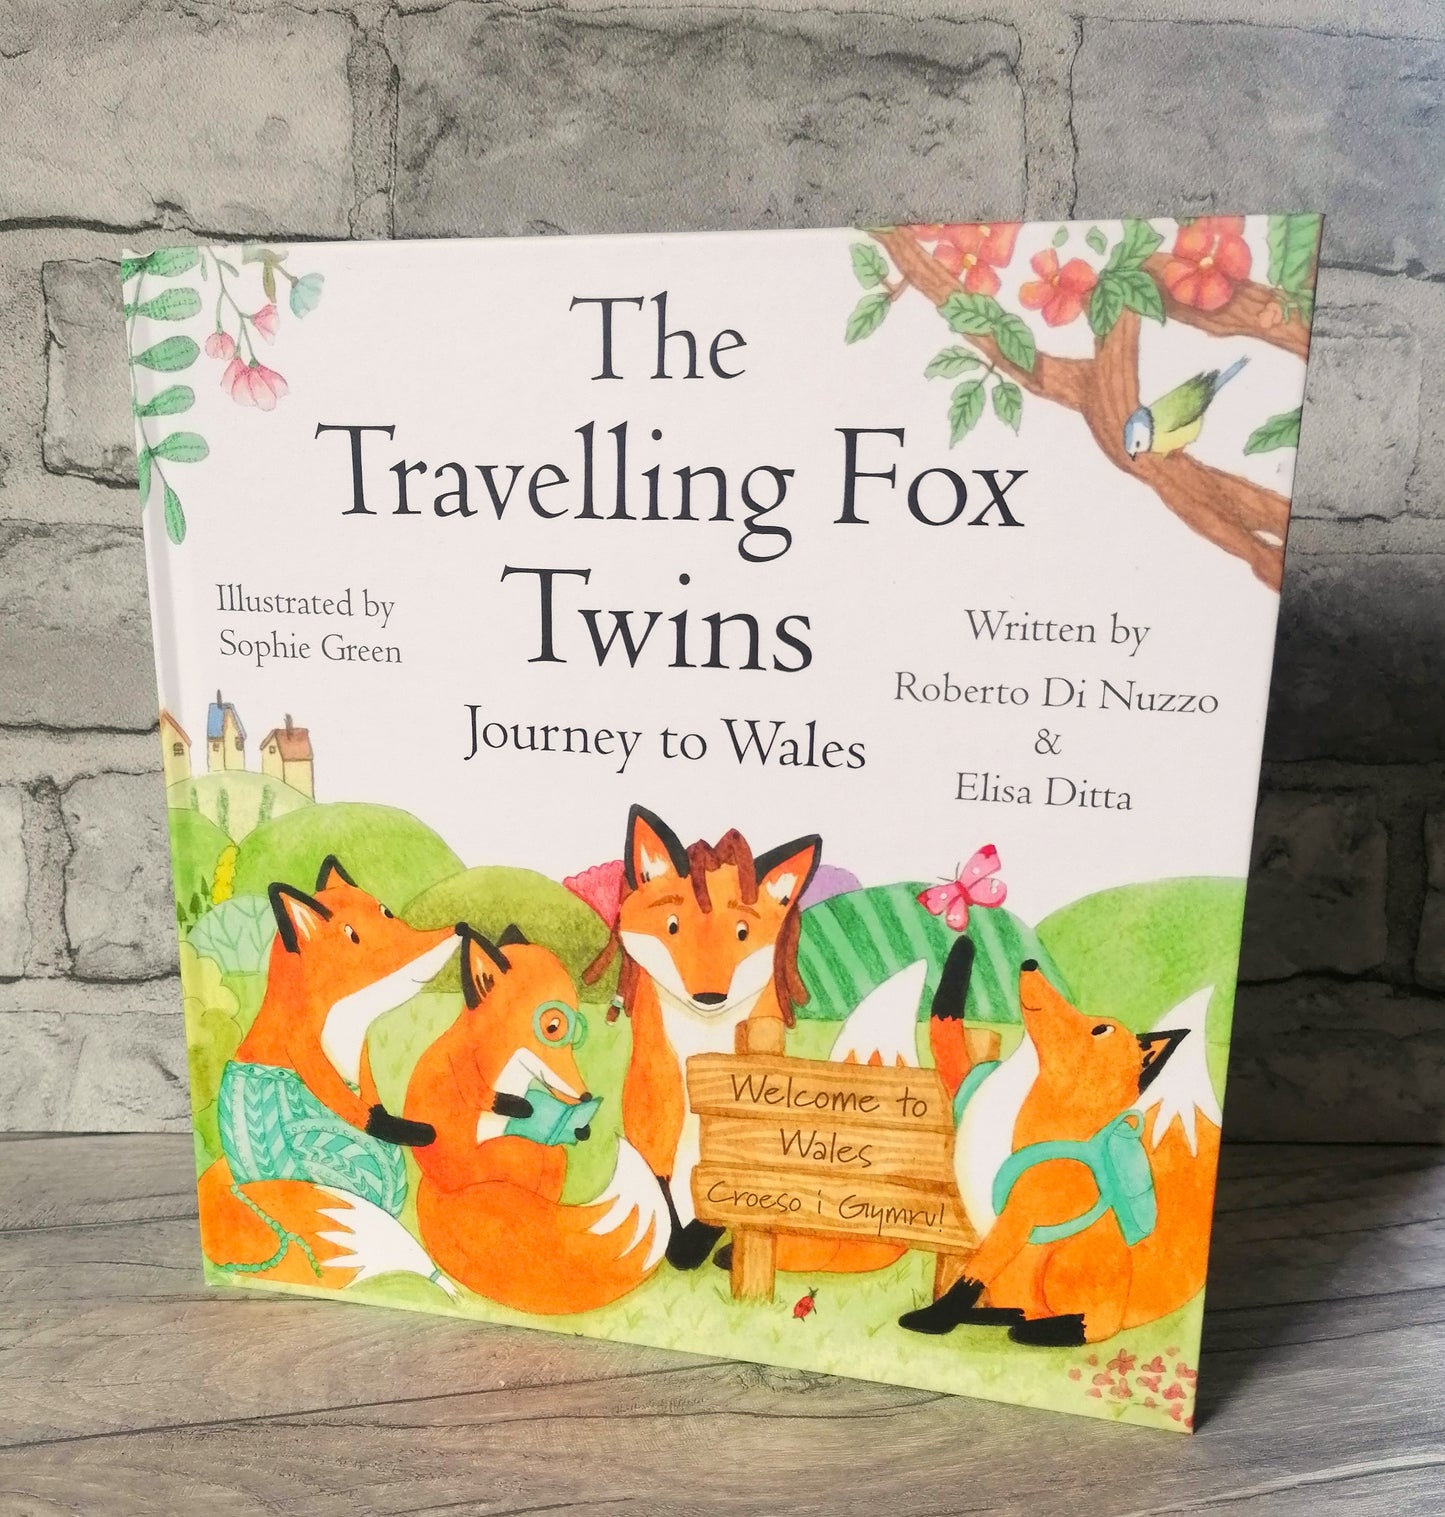 The Travelling Fox Twins: Journey to Wales